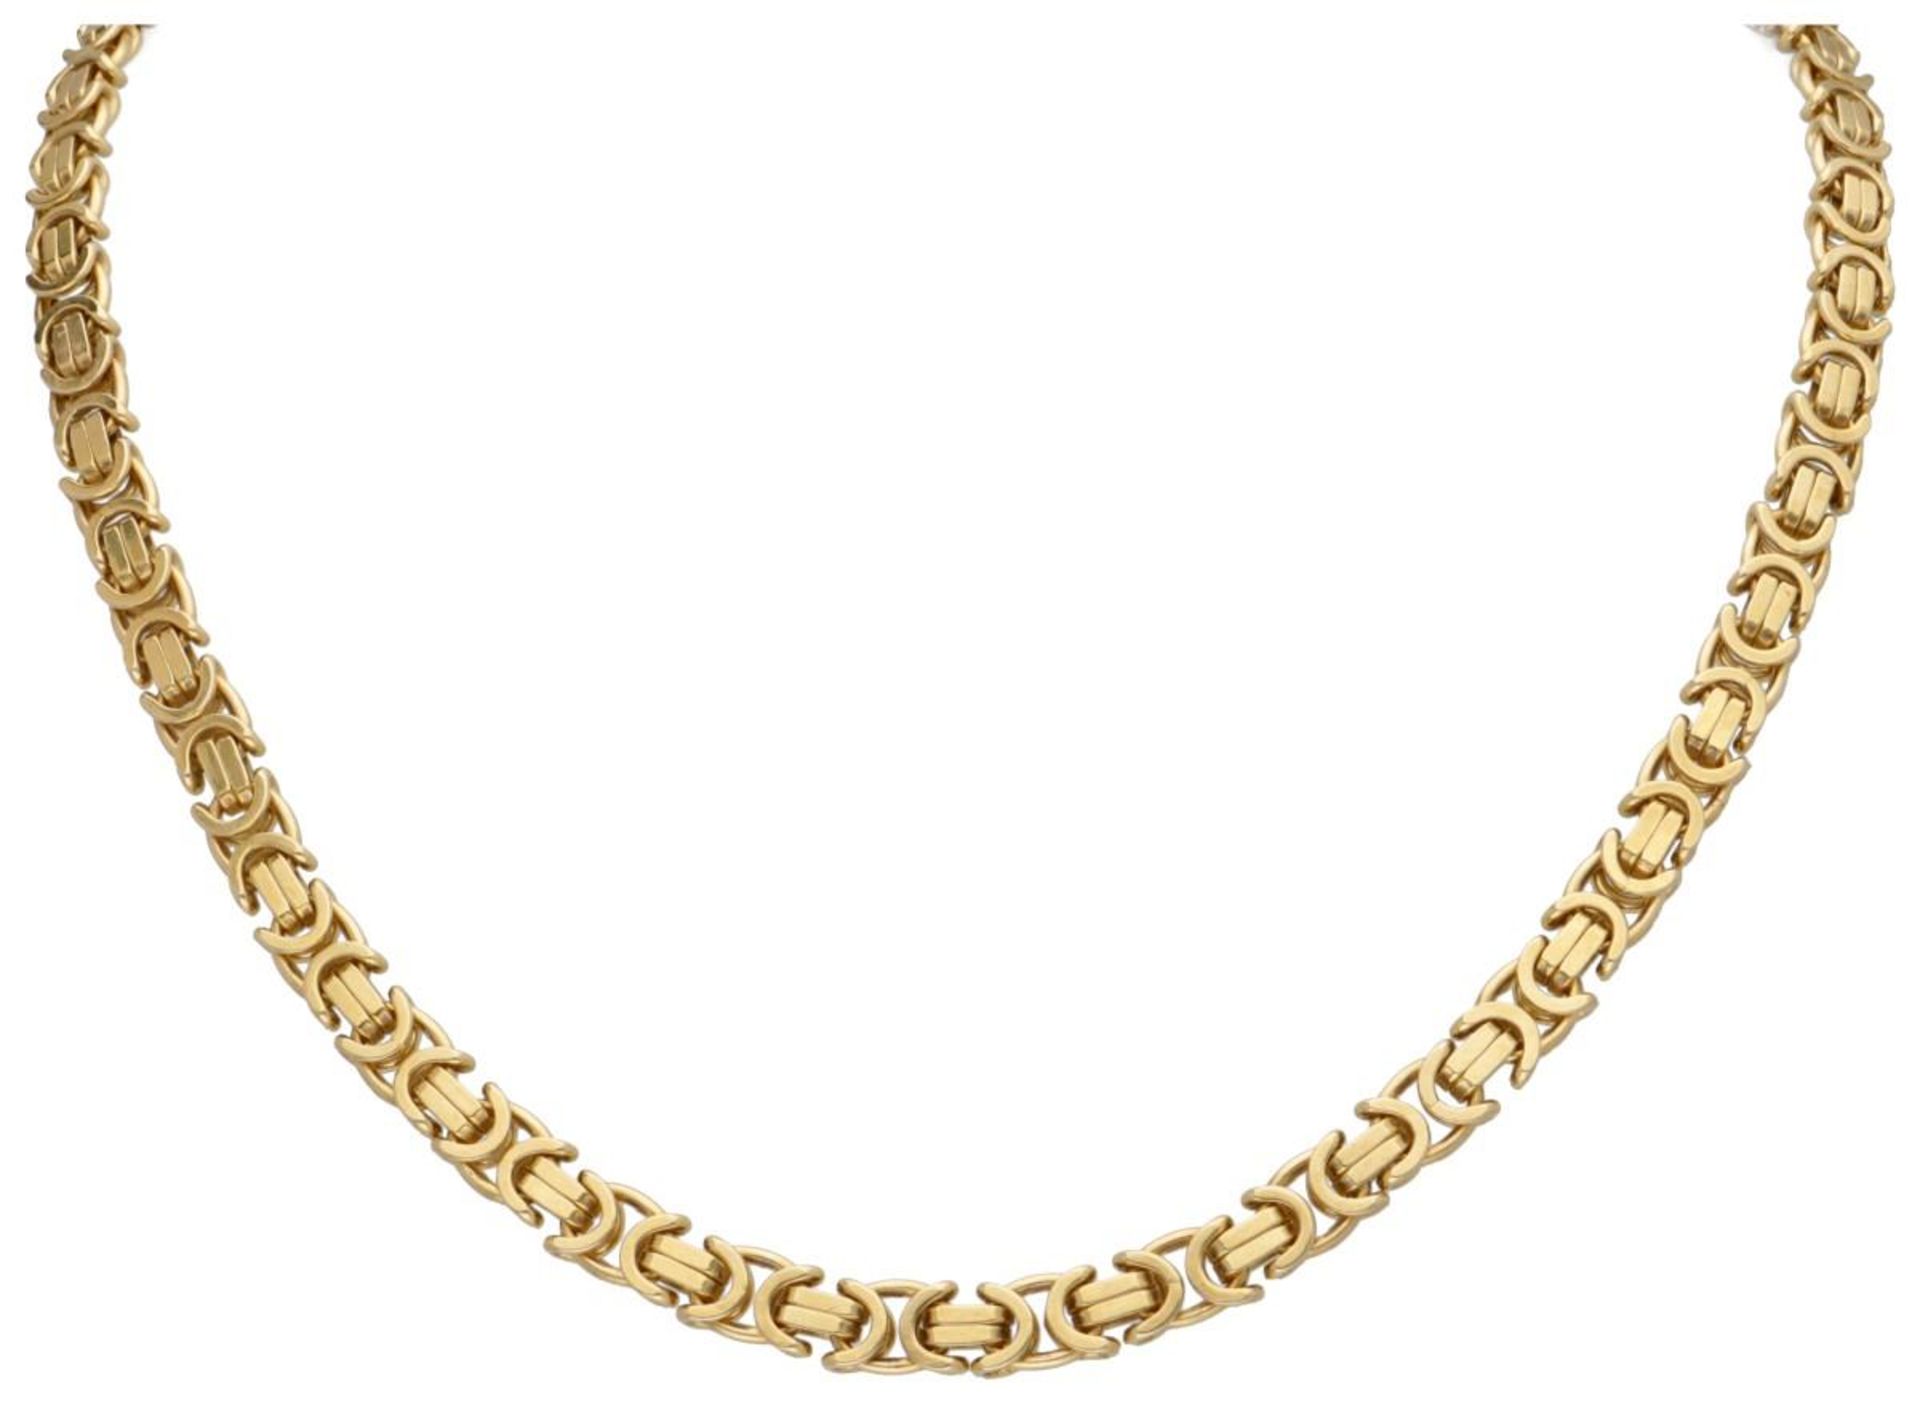 14K. Yellow gold king link necklace.